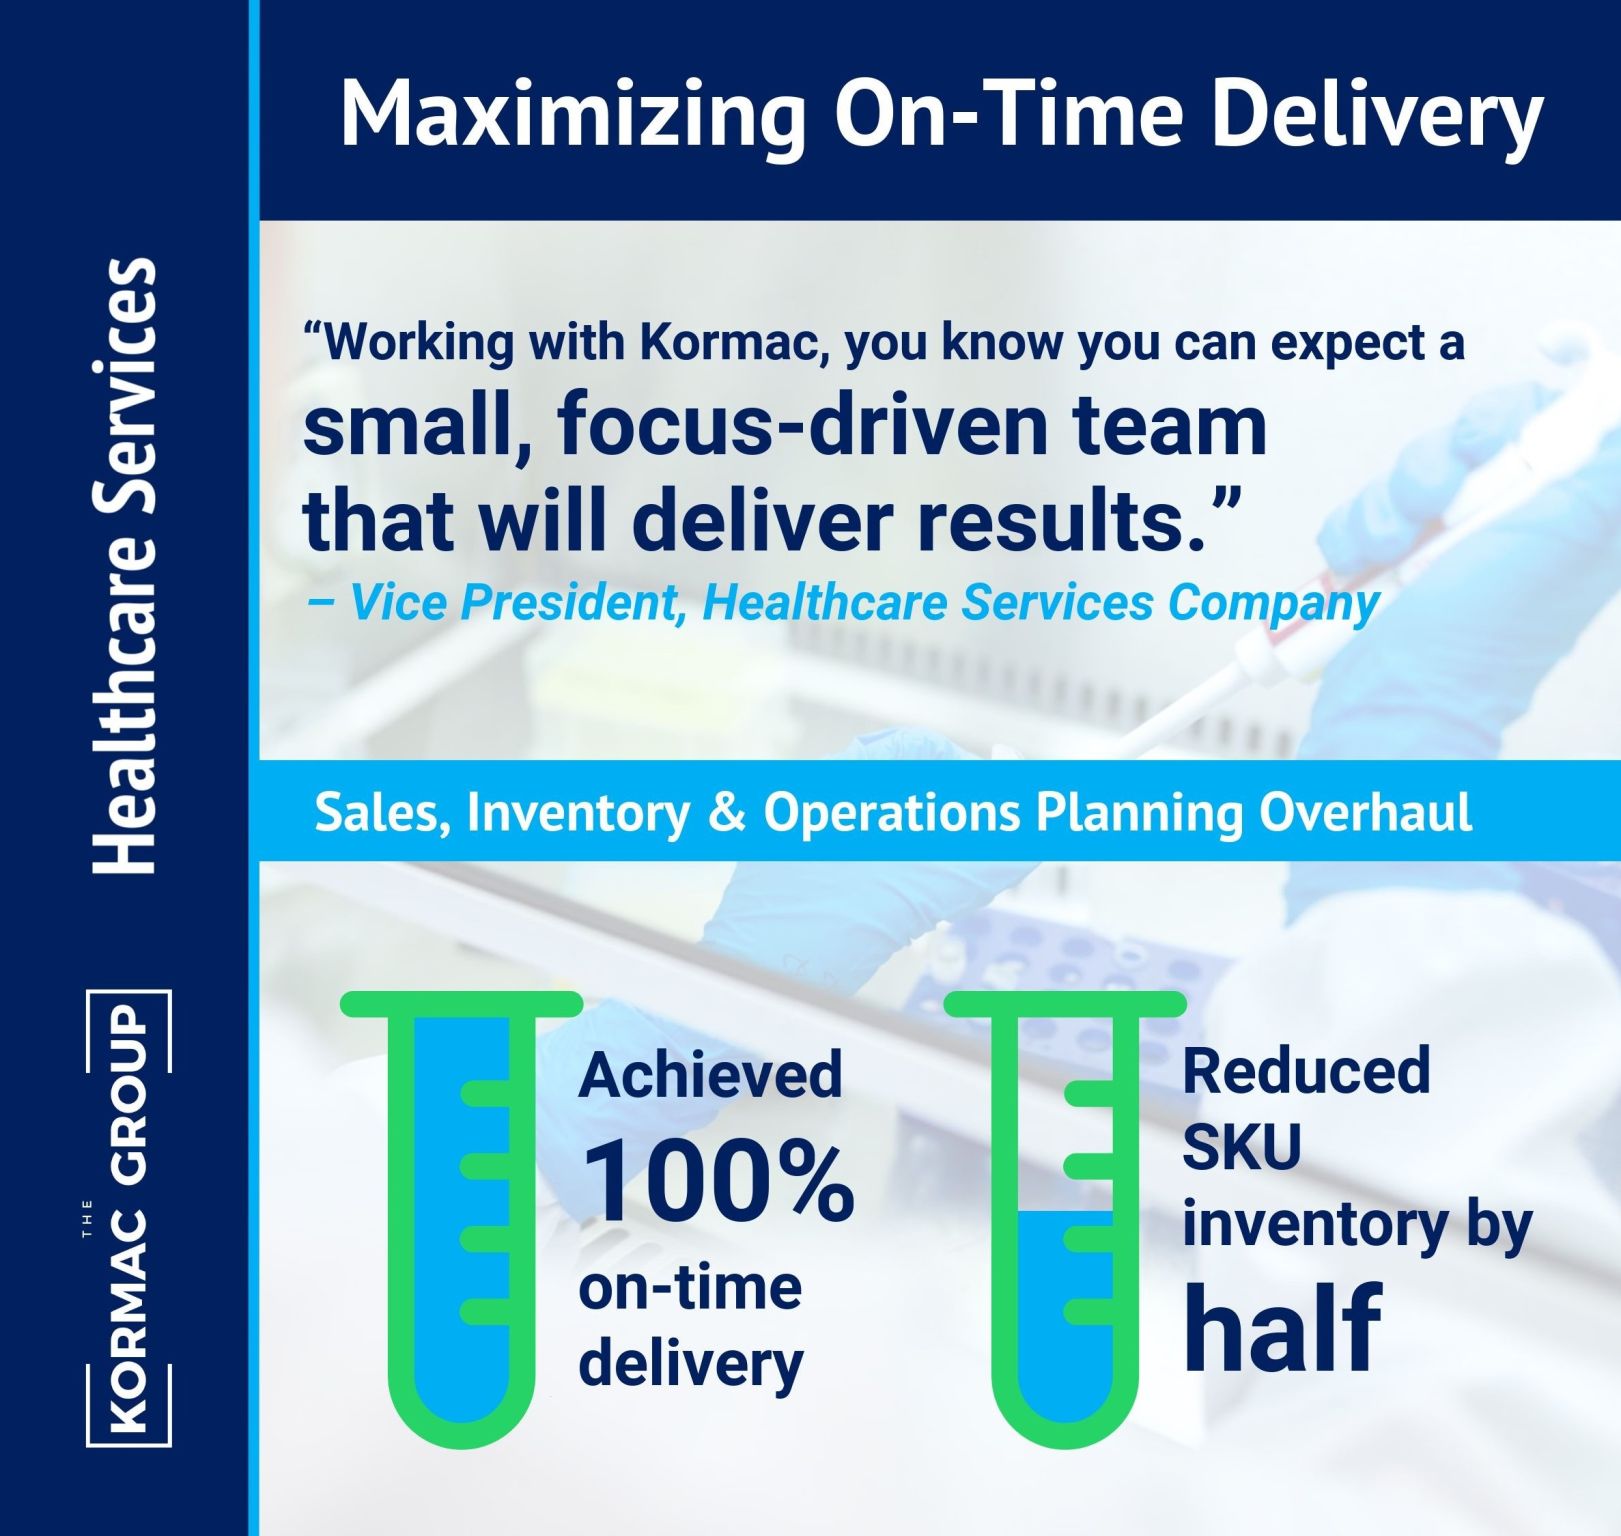 Healthcare Services Maximizing On-Time Delivery "Working with Kormac, you know you can expect a small, focus-driven team that will deliver results." - Vice President, Healthcare Services Company Sales, Inventory & Operations Planning Overhaul Achieved 100% on-time delivery and reduced SKU inventory by half